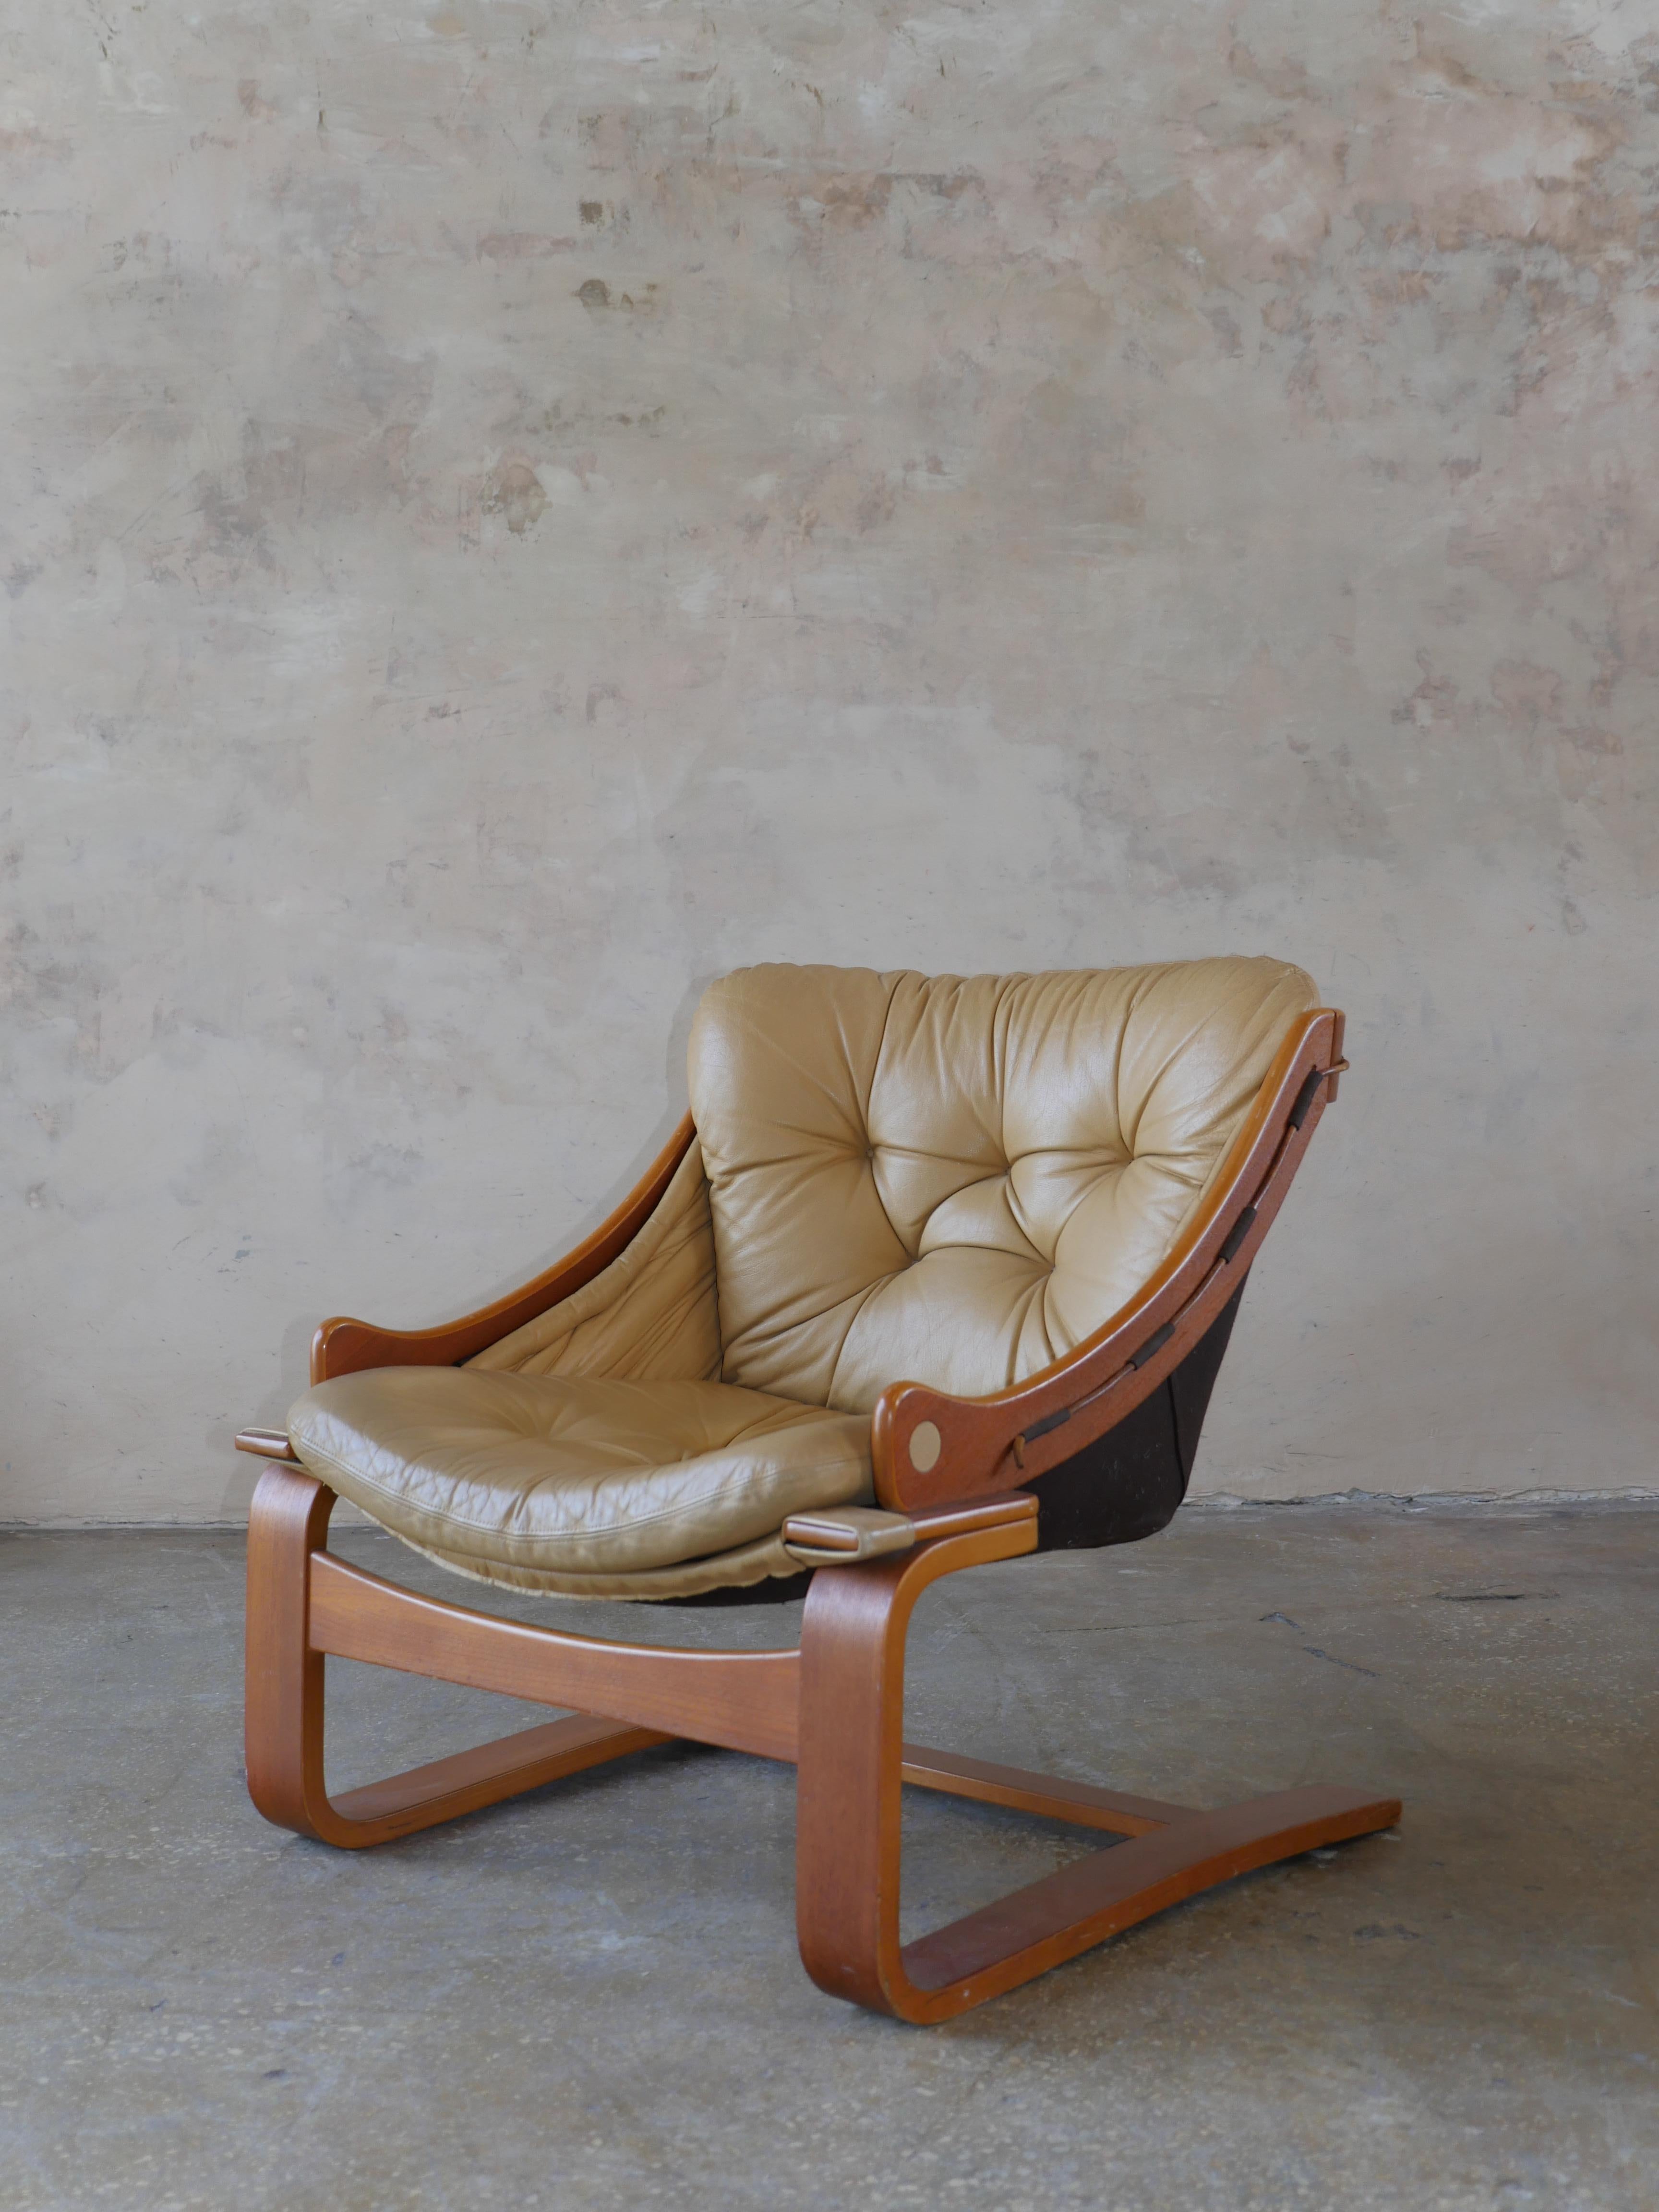 1970s, Scandinavian Bentwood Cantilevered Leather Lounge Chair 1